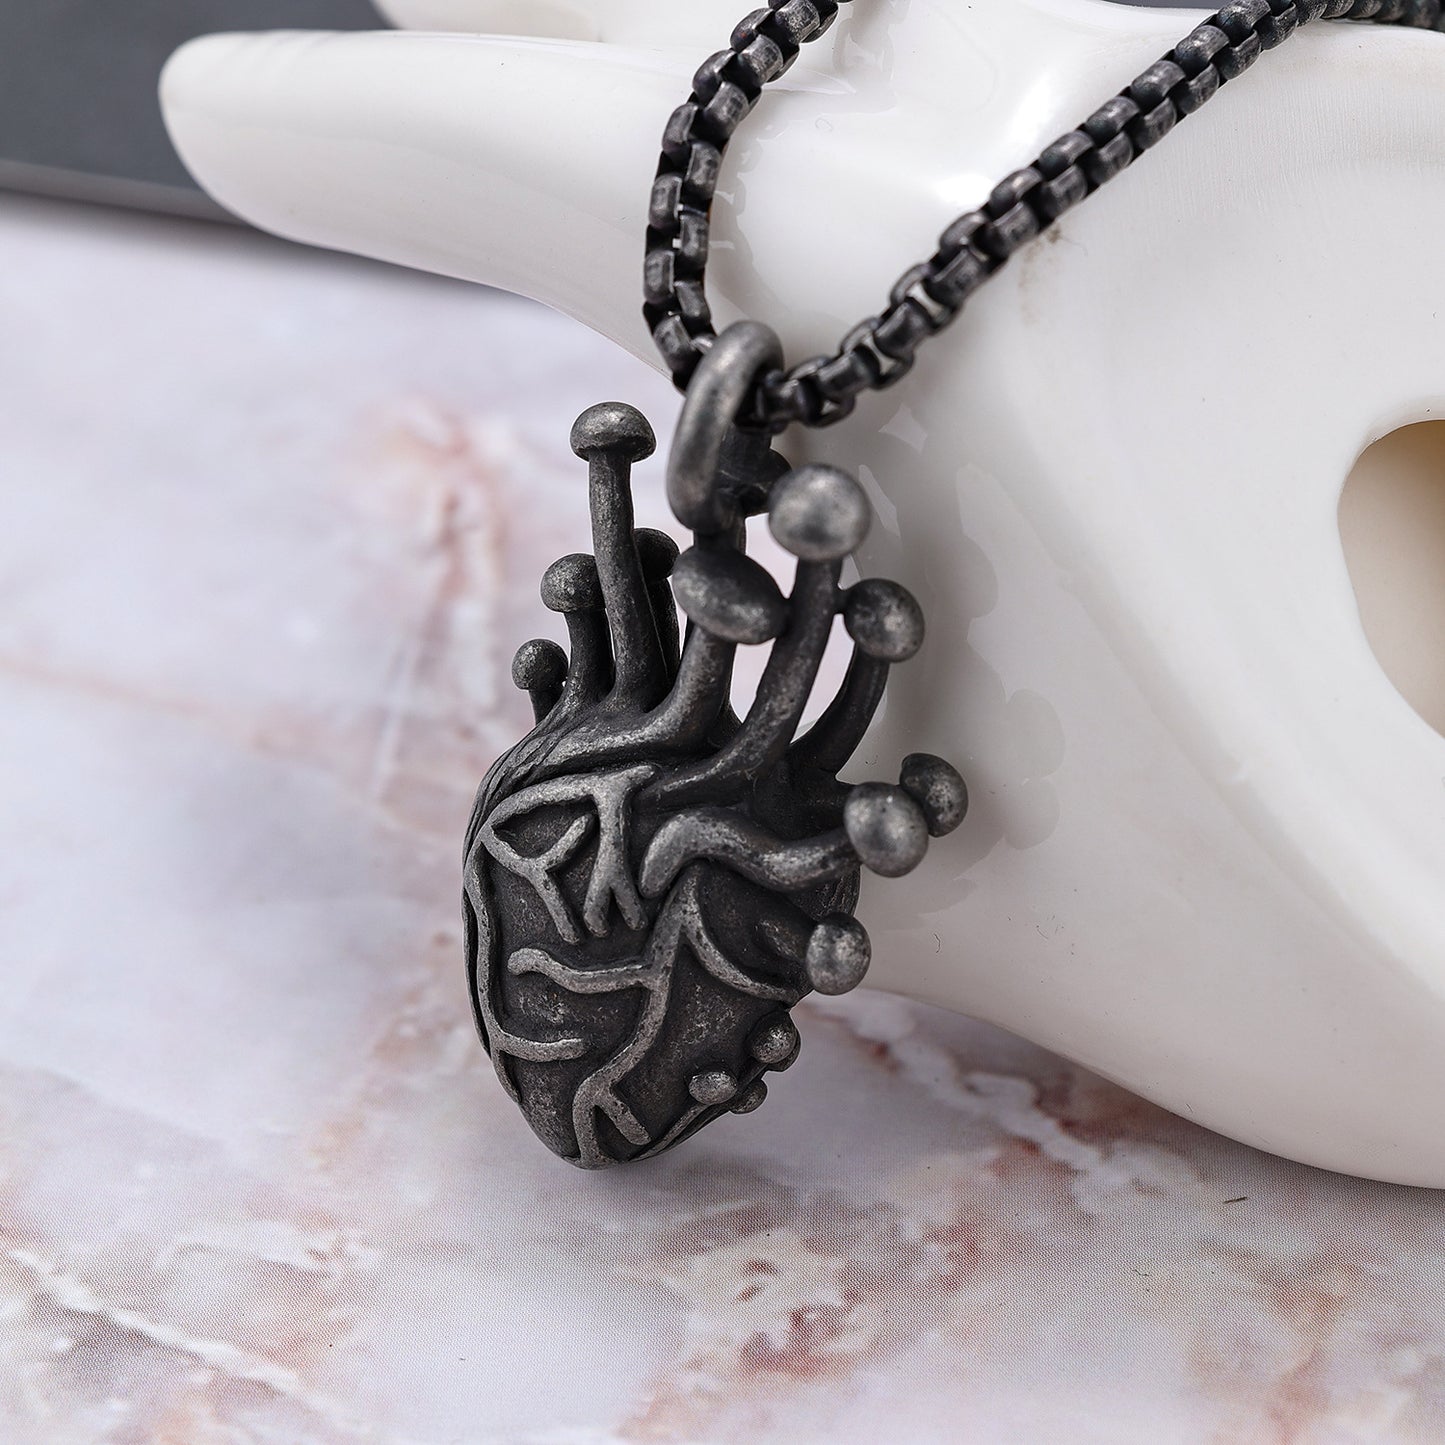 Beating Heart Shape Stainless Steel Pendant Necklace